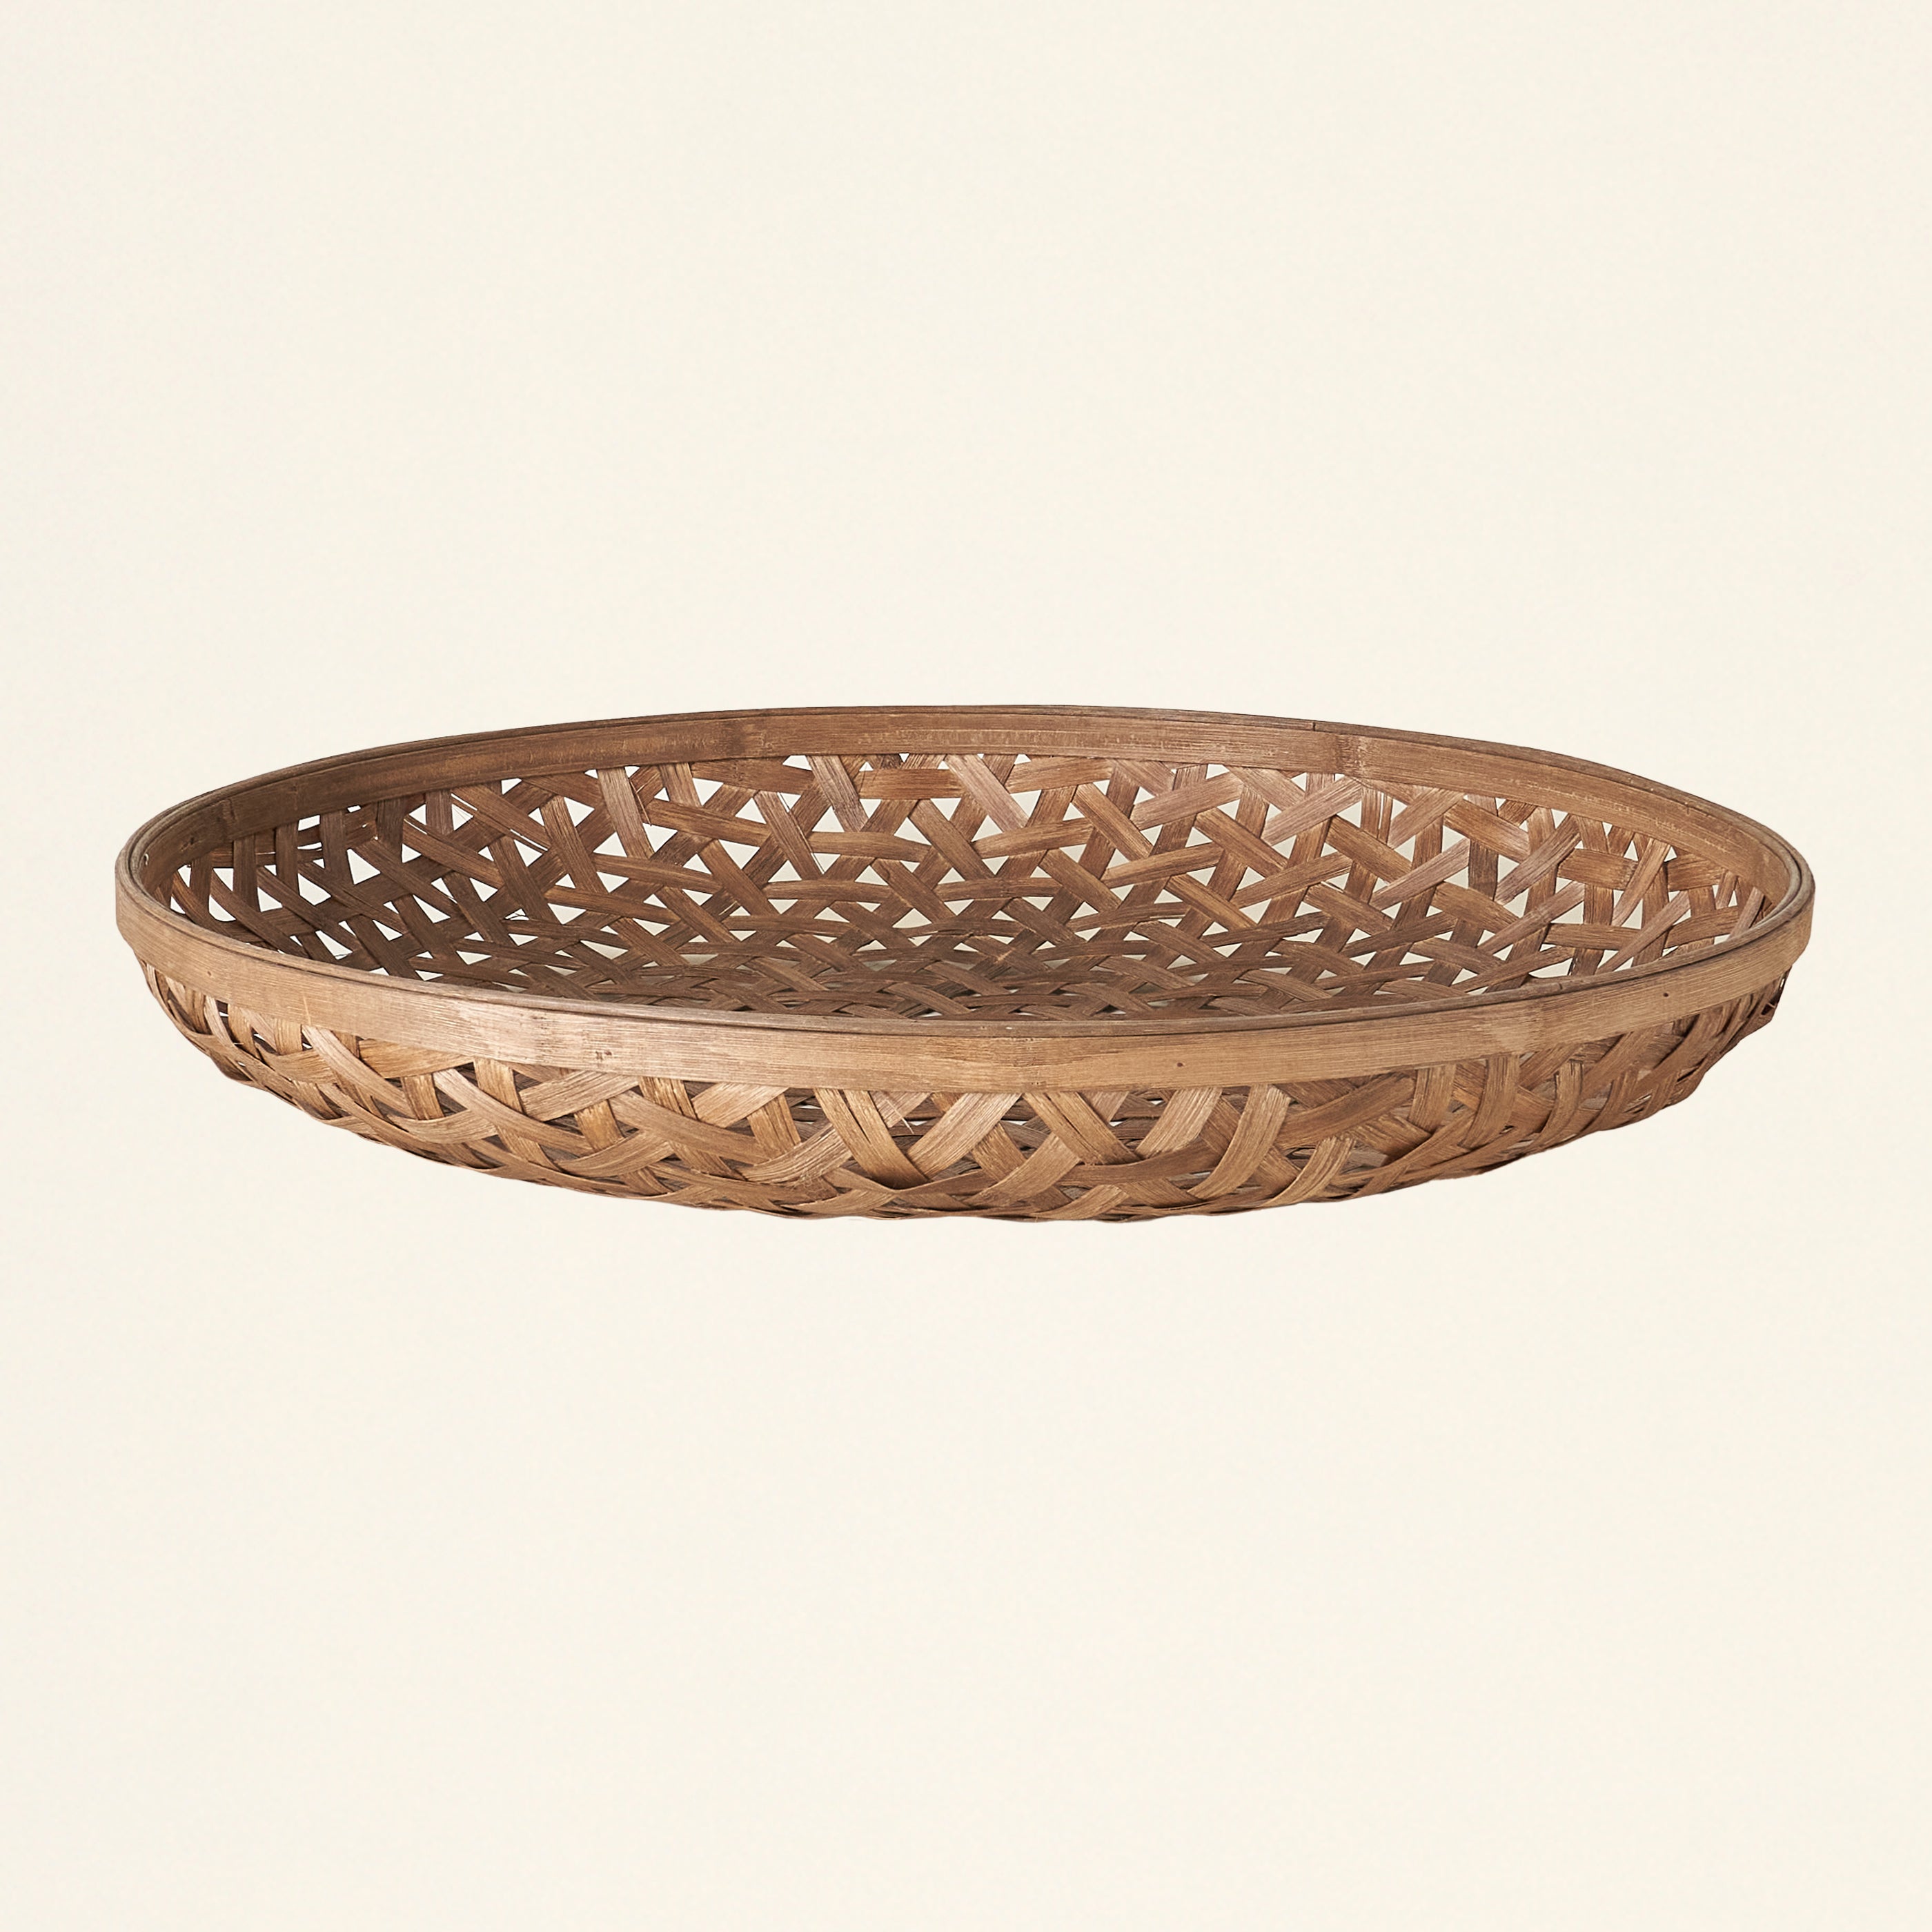 Round Woven Bamboo Baskets - Set of 3